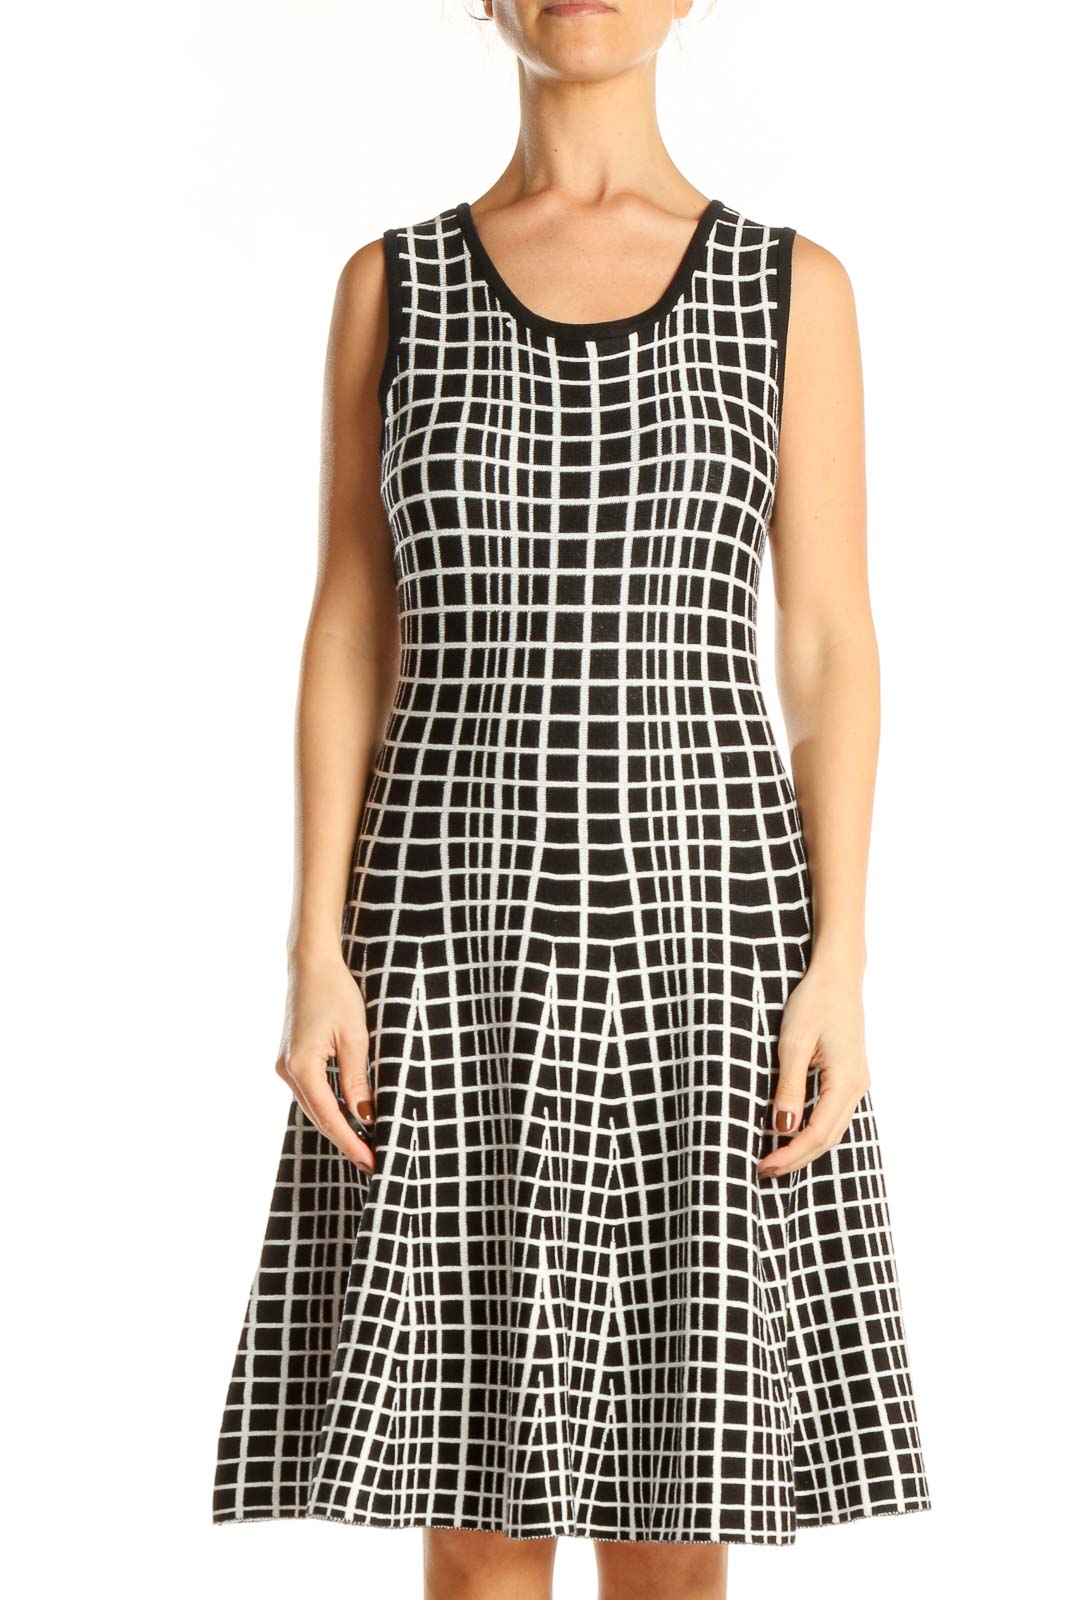 Black White Checkered Classic Fit & Flare Dress Front